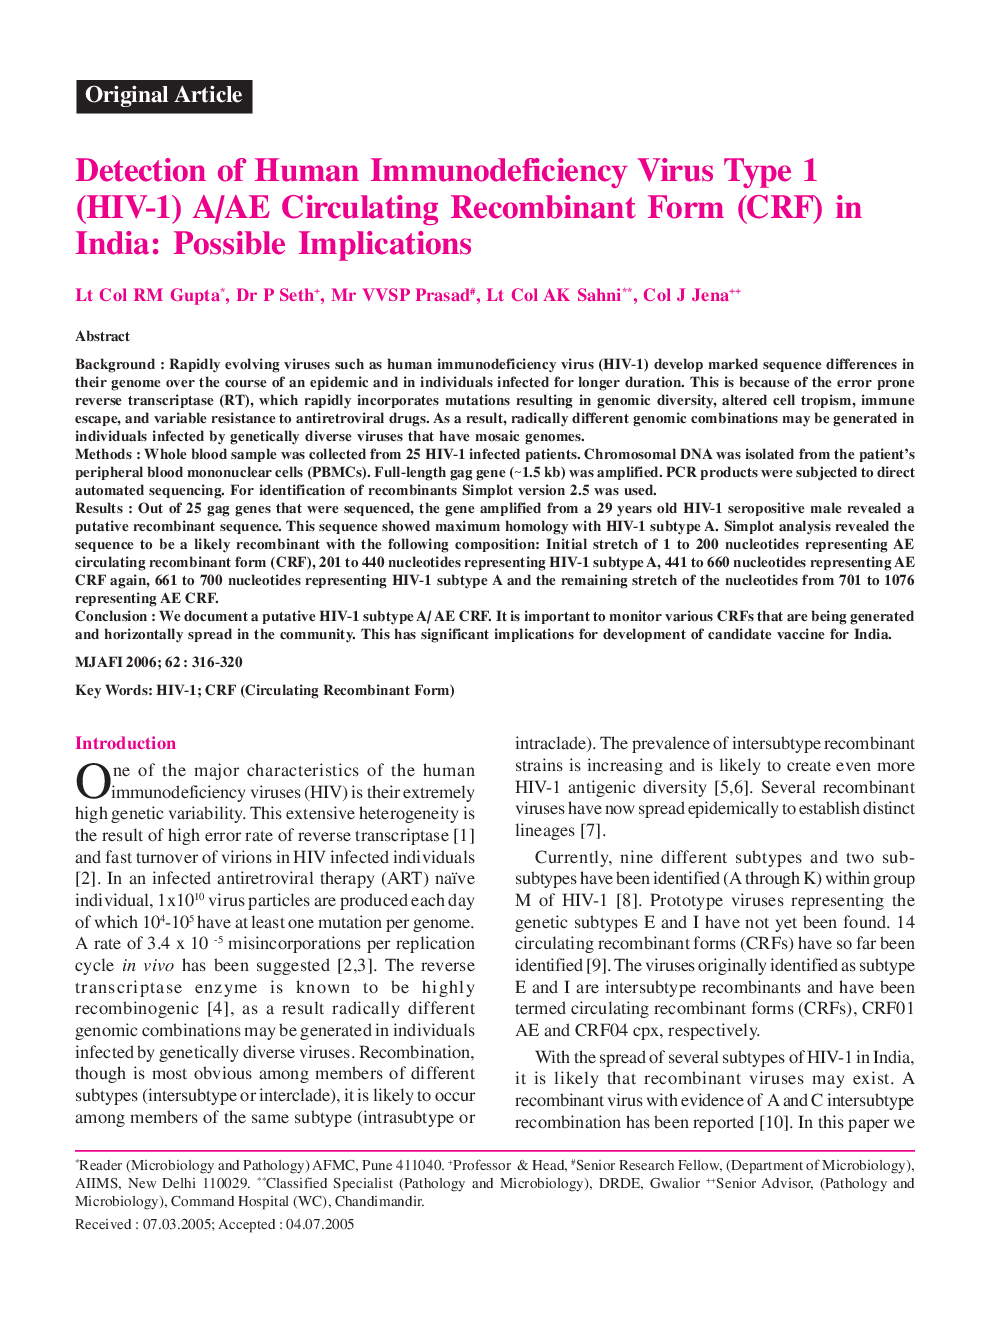 Detection of Human Immunodeficiency Virus Type 1 (HIV-1) A/AE Circulating Recombinant Form (CRF) in India: Possible Implications